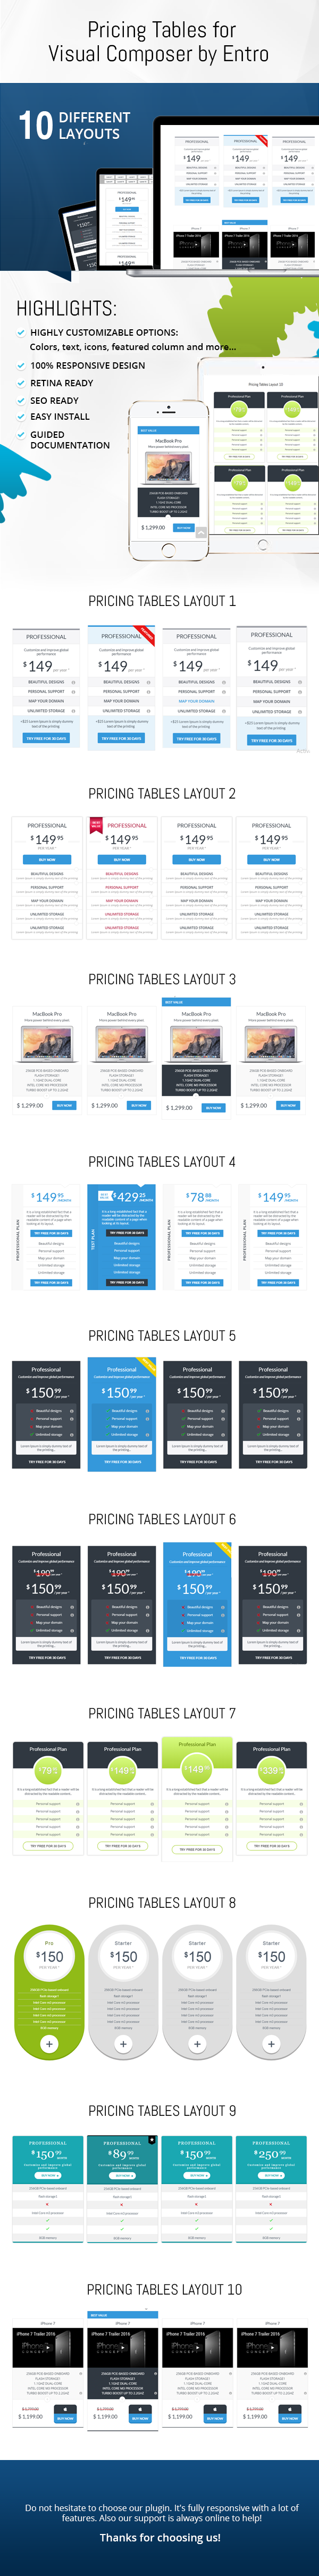 Ultimate VC Pricing Tables by Entro - 2